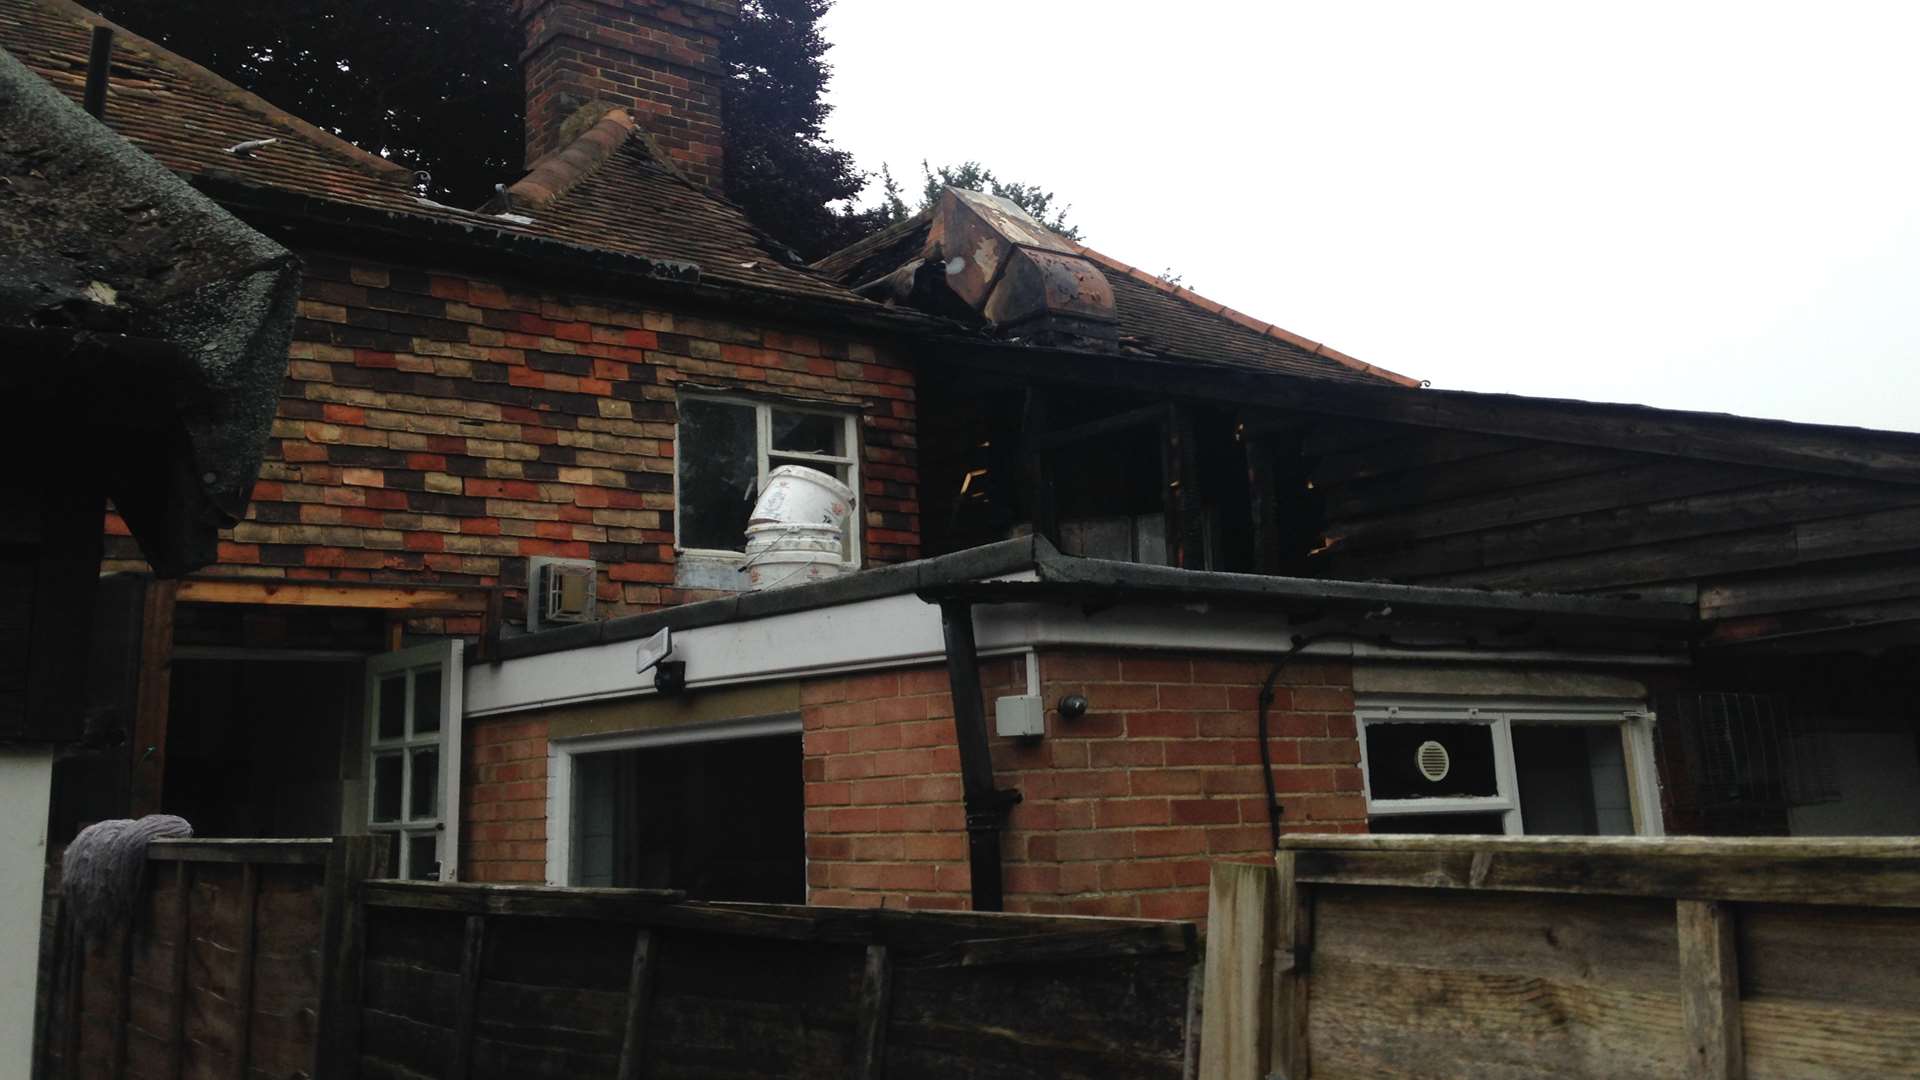 The roof was destroyed in the blaze